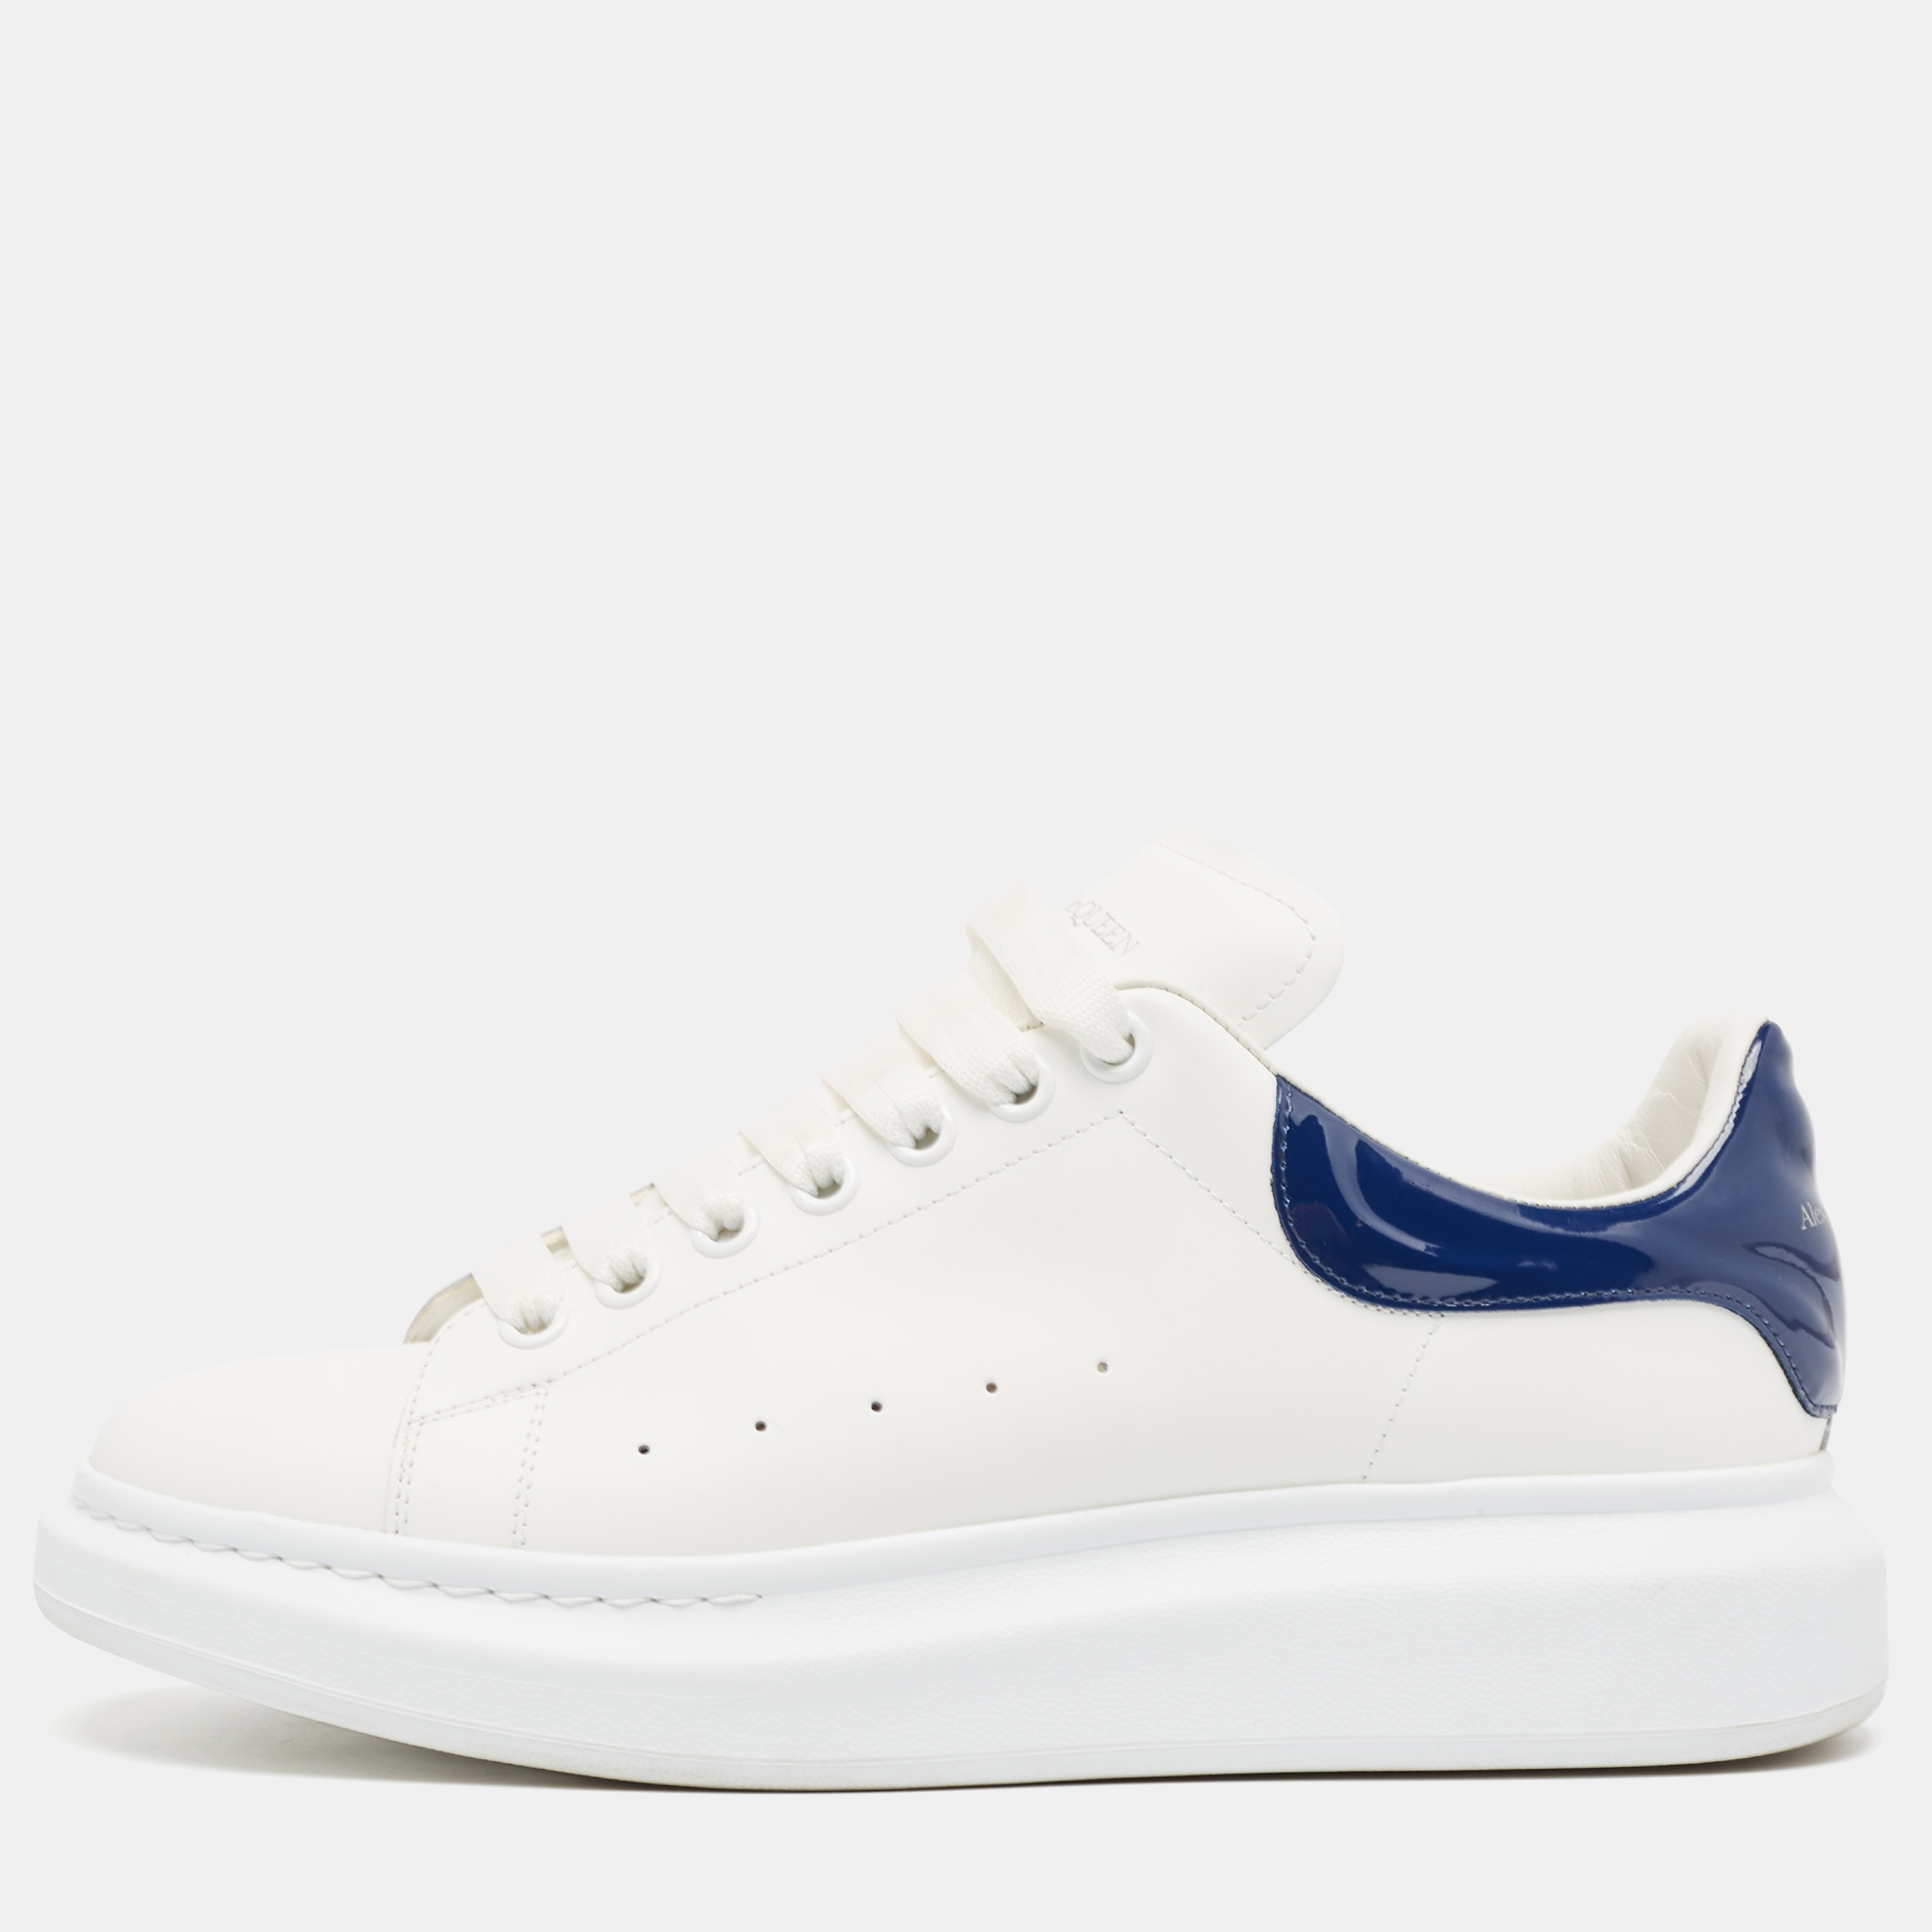 Alexander mcqueen white/blue leather oversized sneakers size 43